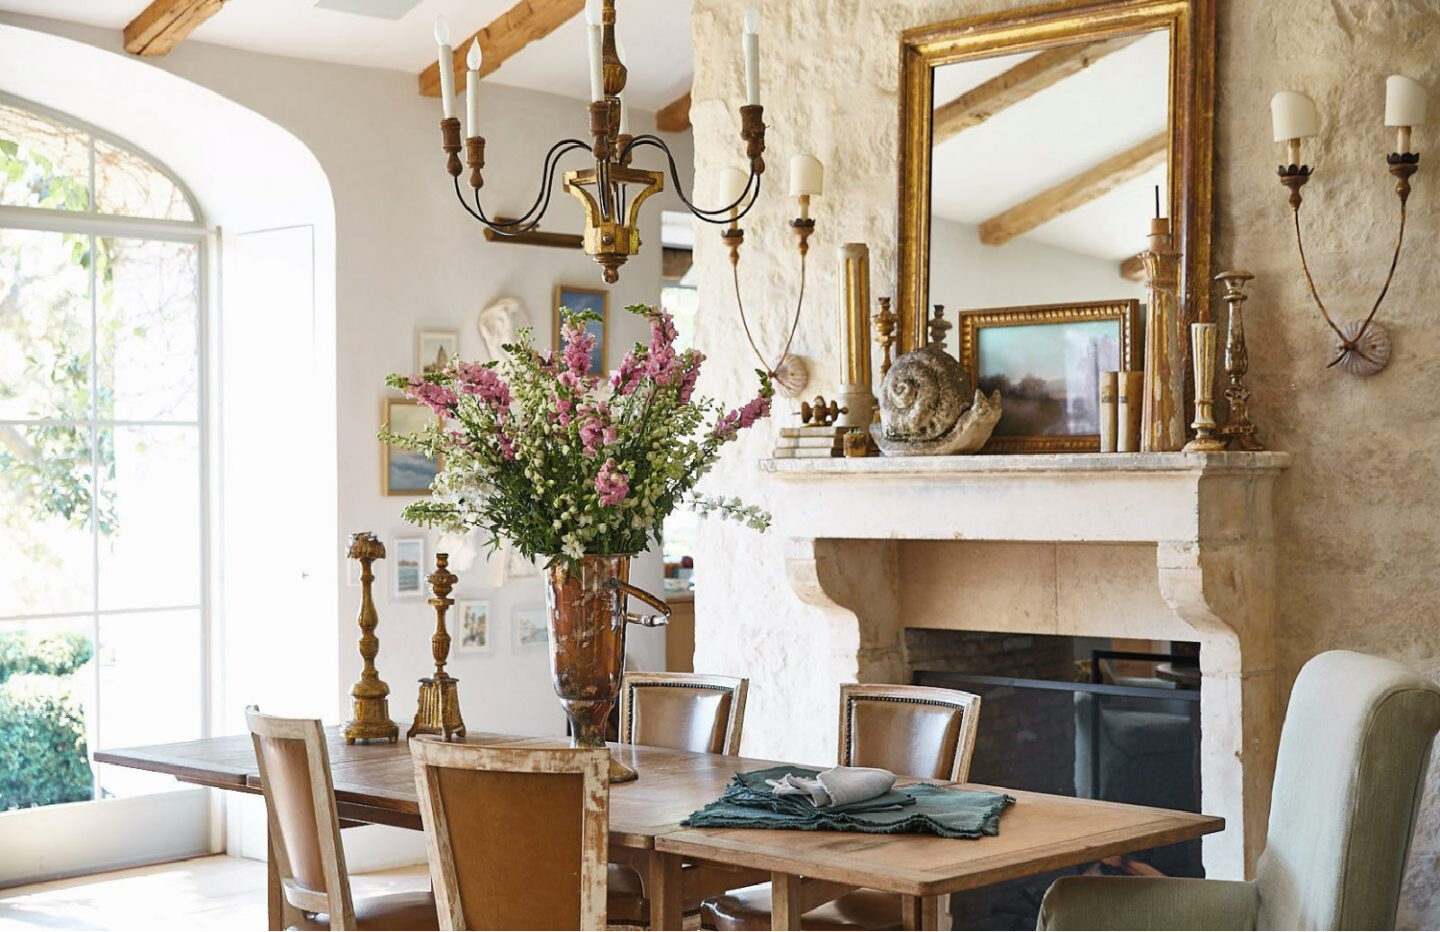 Patina Living photo of dining room with limestone French mantel, French farmhouse chandeliers, plaster walls, and rustic modern farmhouse style. Brooke Giannetti and Steve Giannetti designed the space at Patina Farm. Photo by Victoria Pearson. #patinafarm #limestonefireplace #frenchfarmhouse #interiordesign #modernfarmhouse #diningrooms